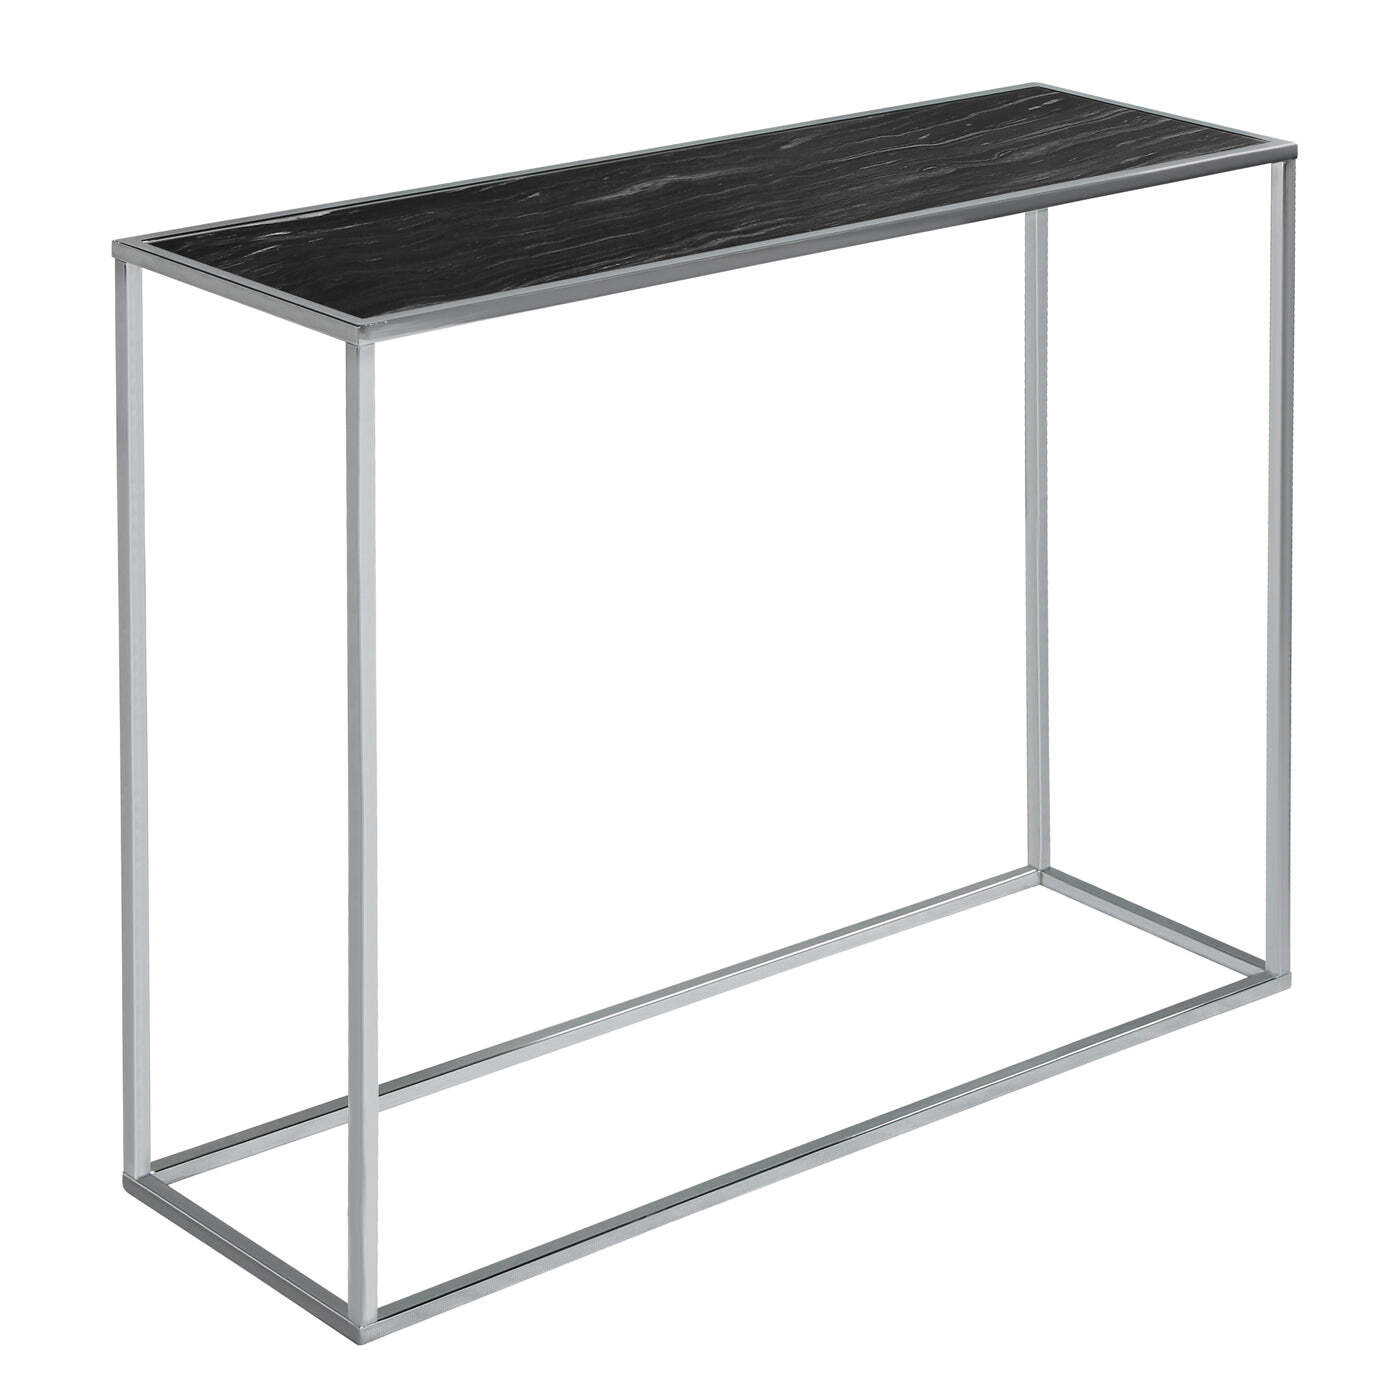 Teddy's Collection Swan Console Table Black and Chrome - image 1